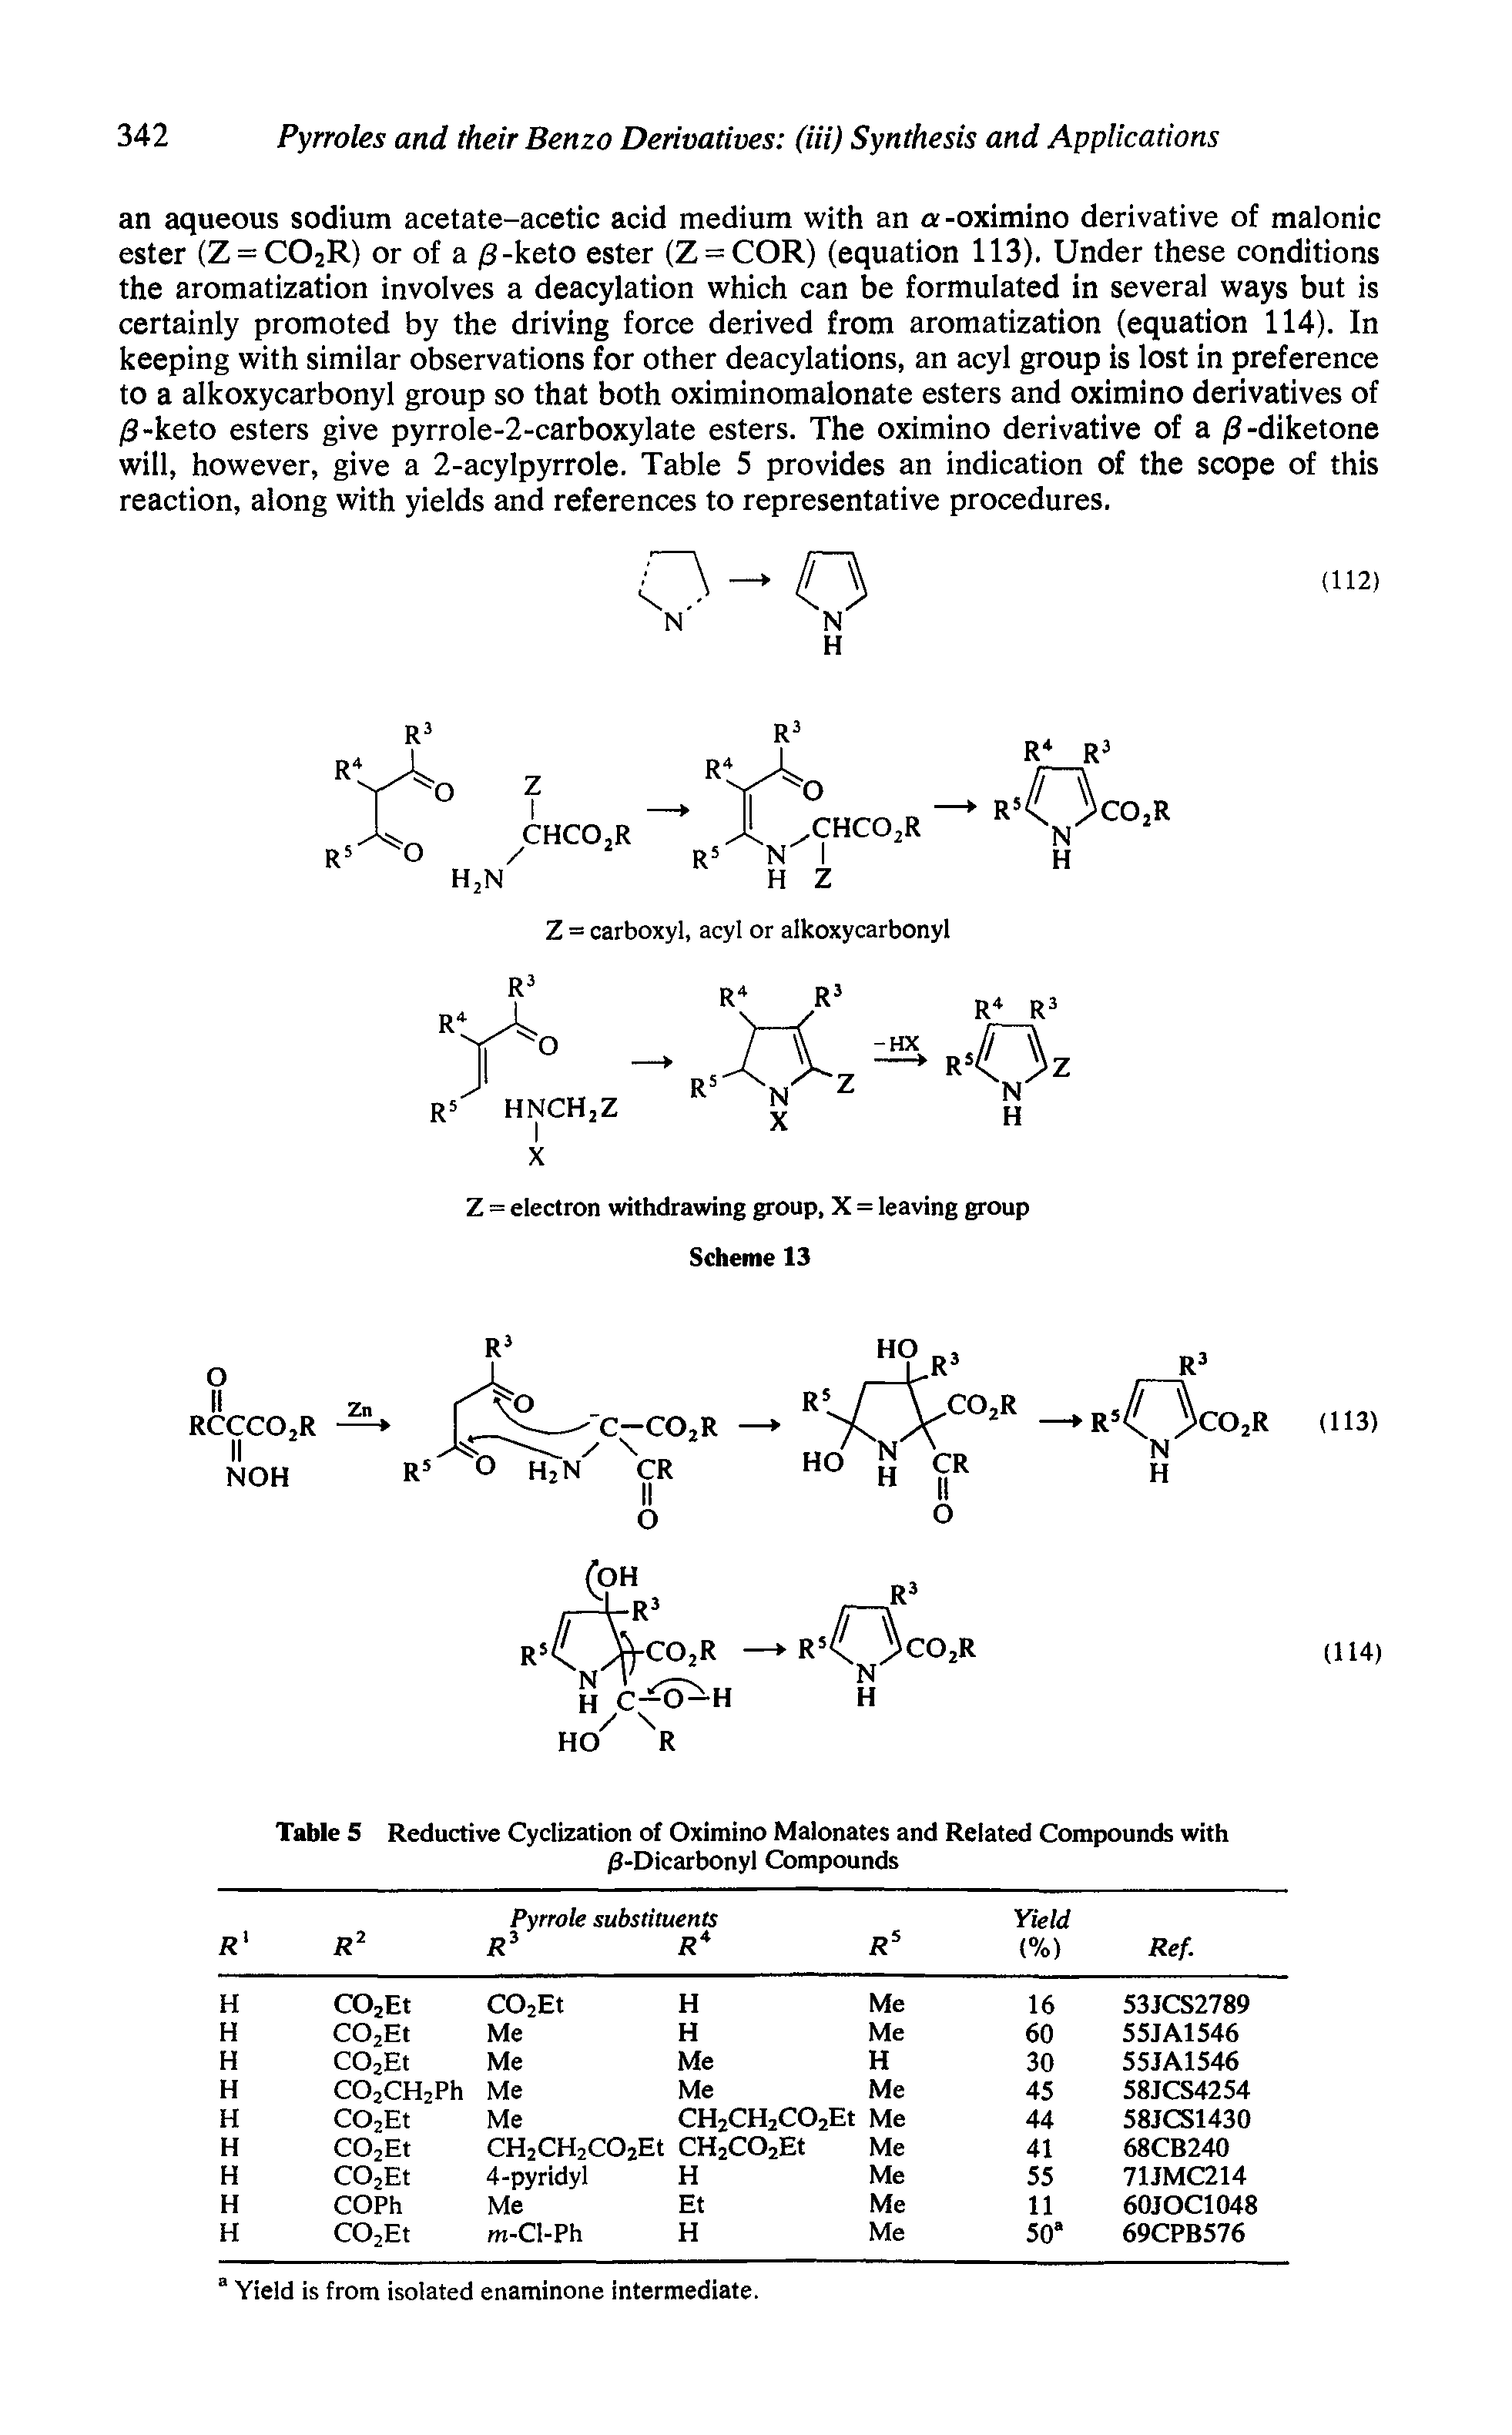 Table 5 Reductive Cyclization of Oximino Malonates and Related Compounds with /3-Dicarbonyl Compounds...